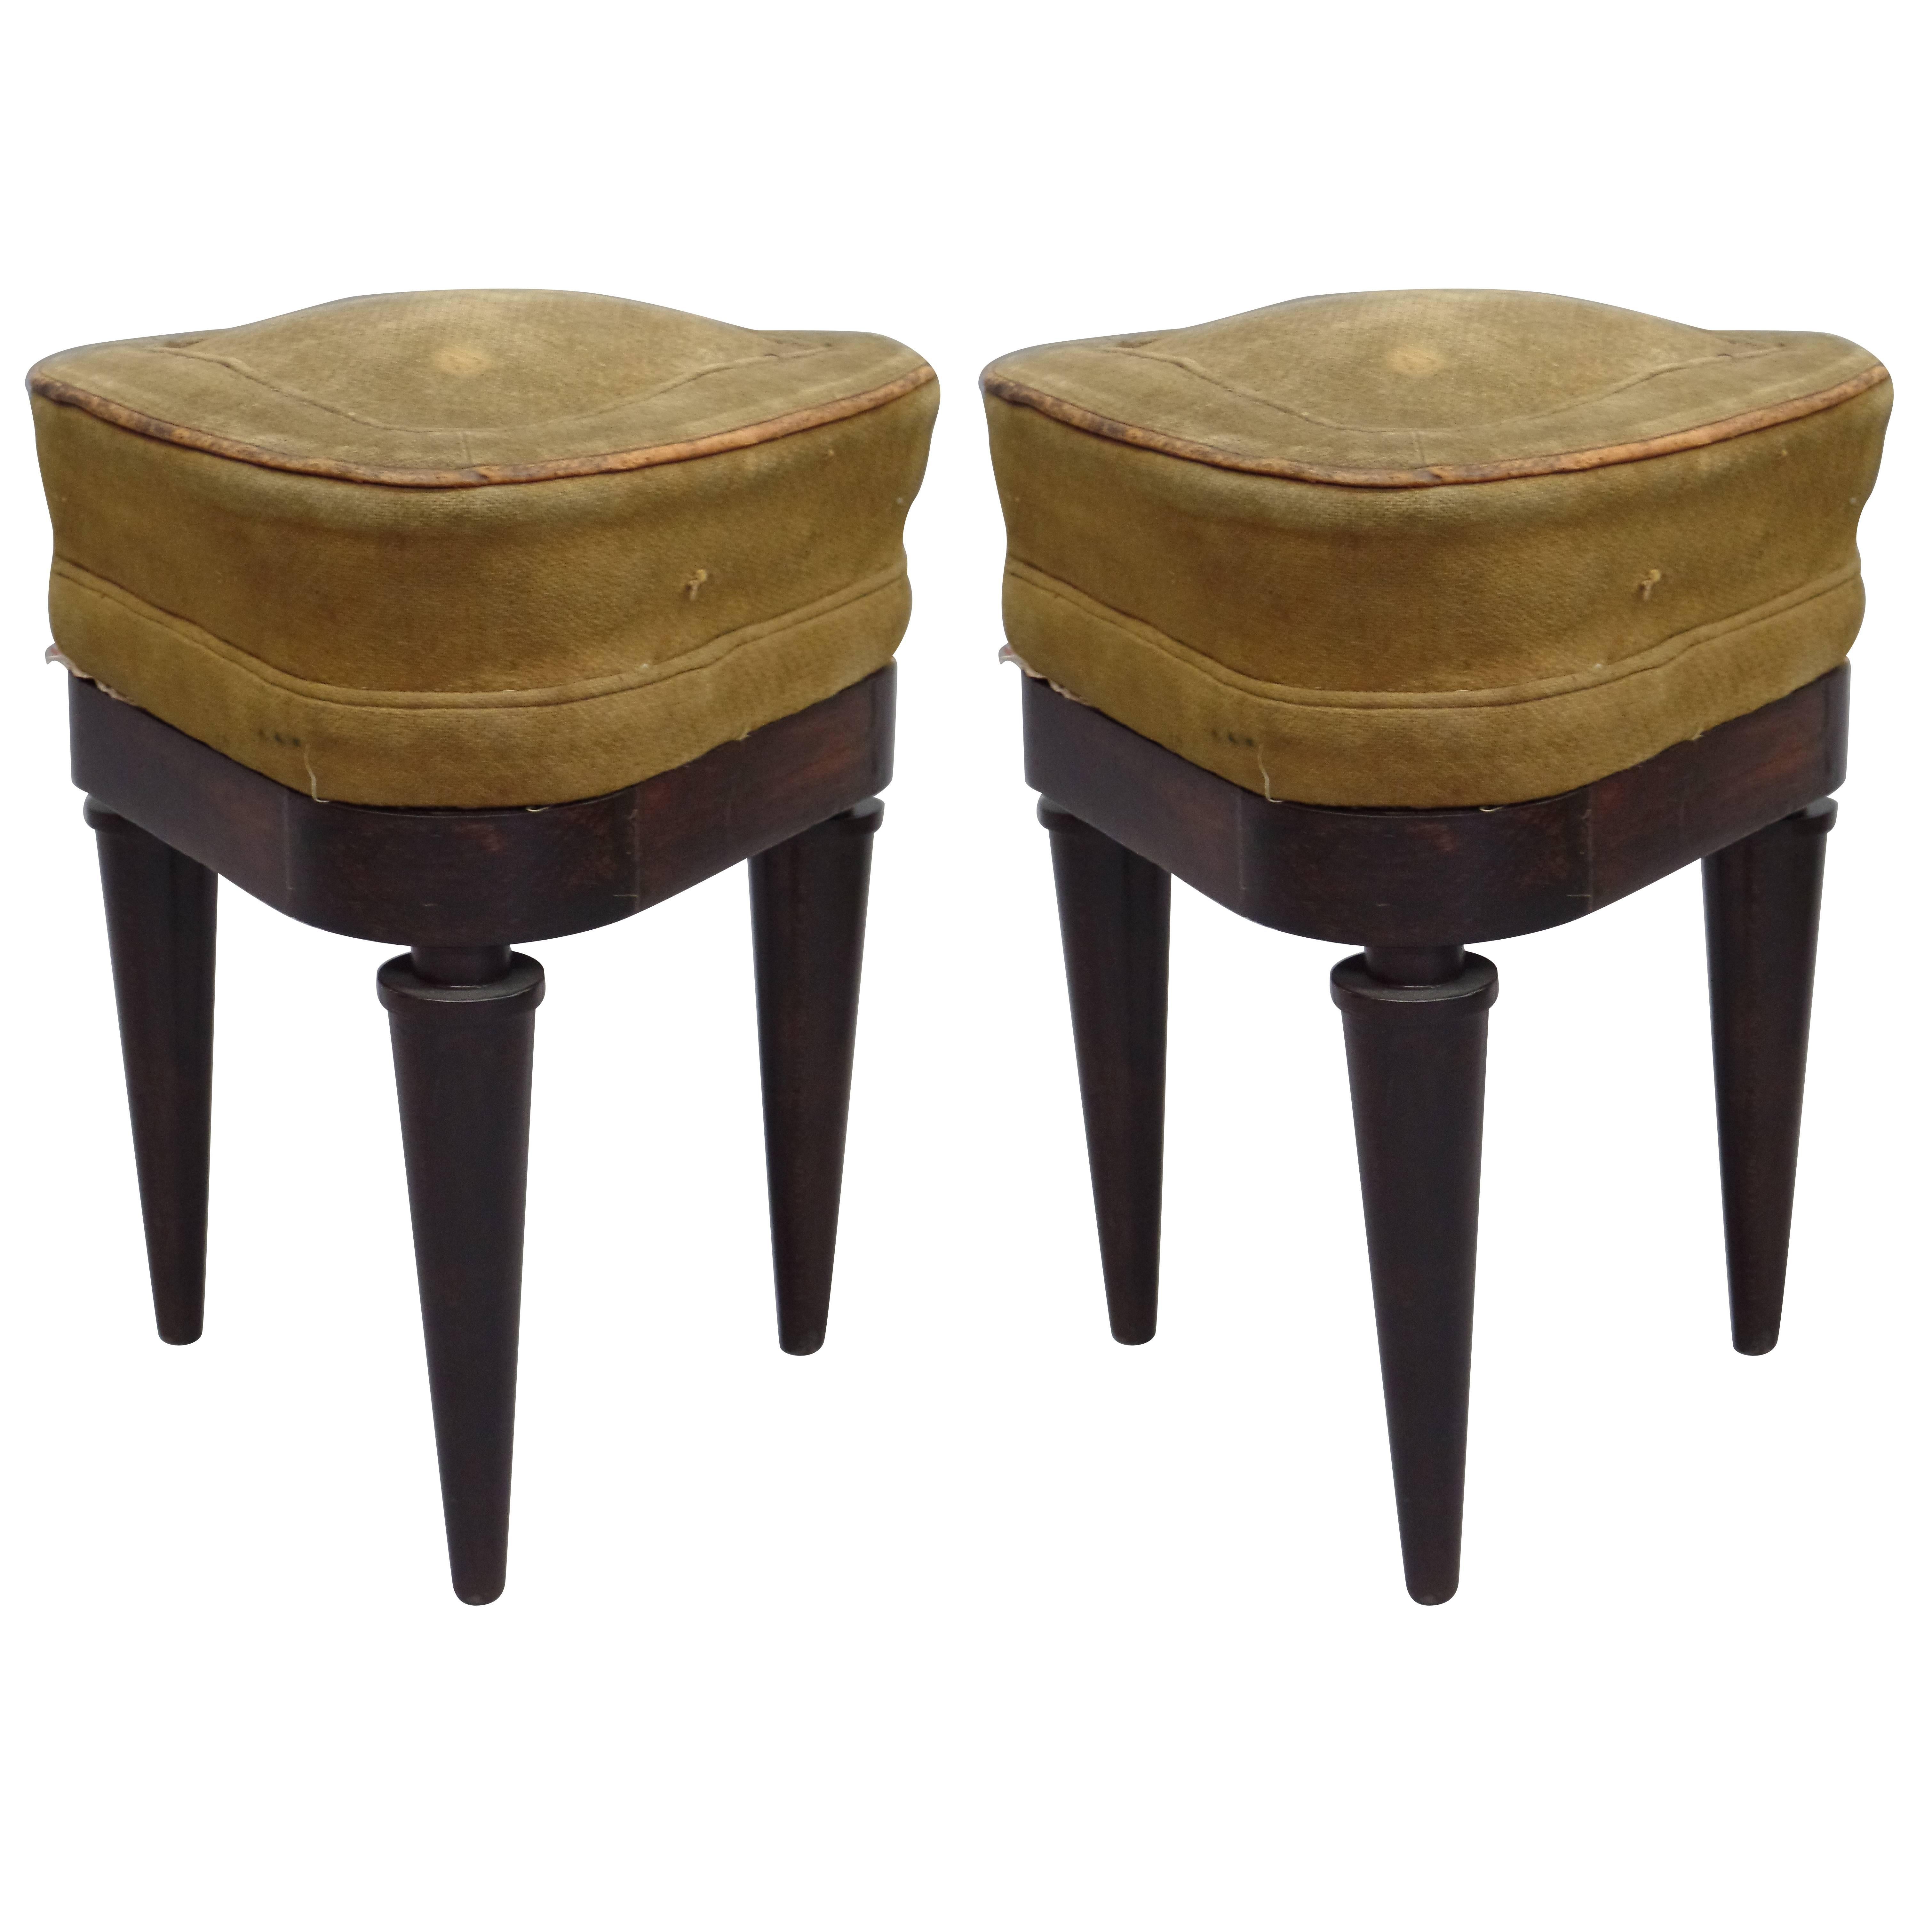 French Modern Neoclassical Mahogany and Suede Tri-Corner Stools, Andre Arbus